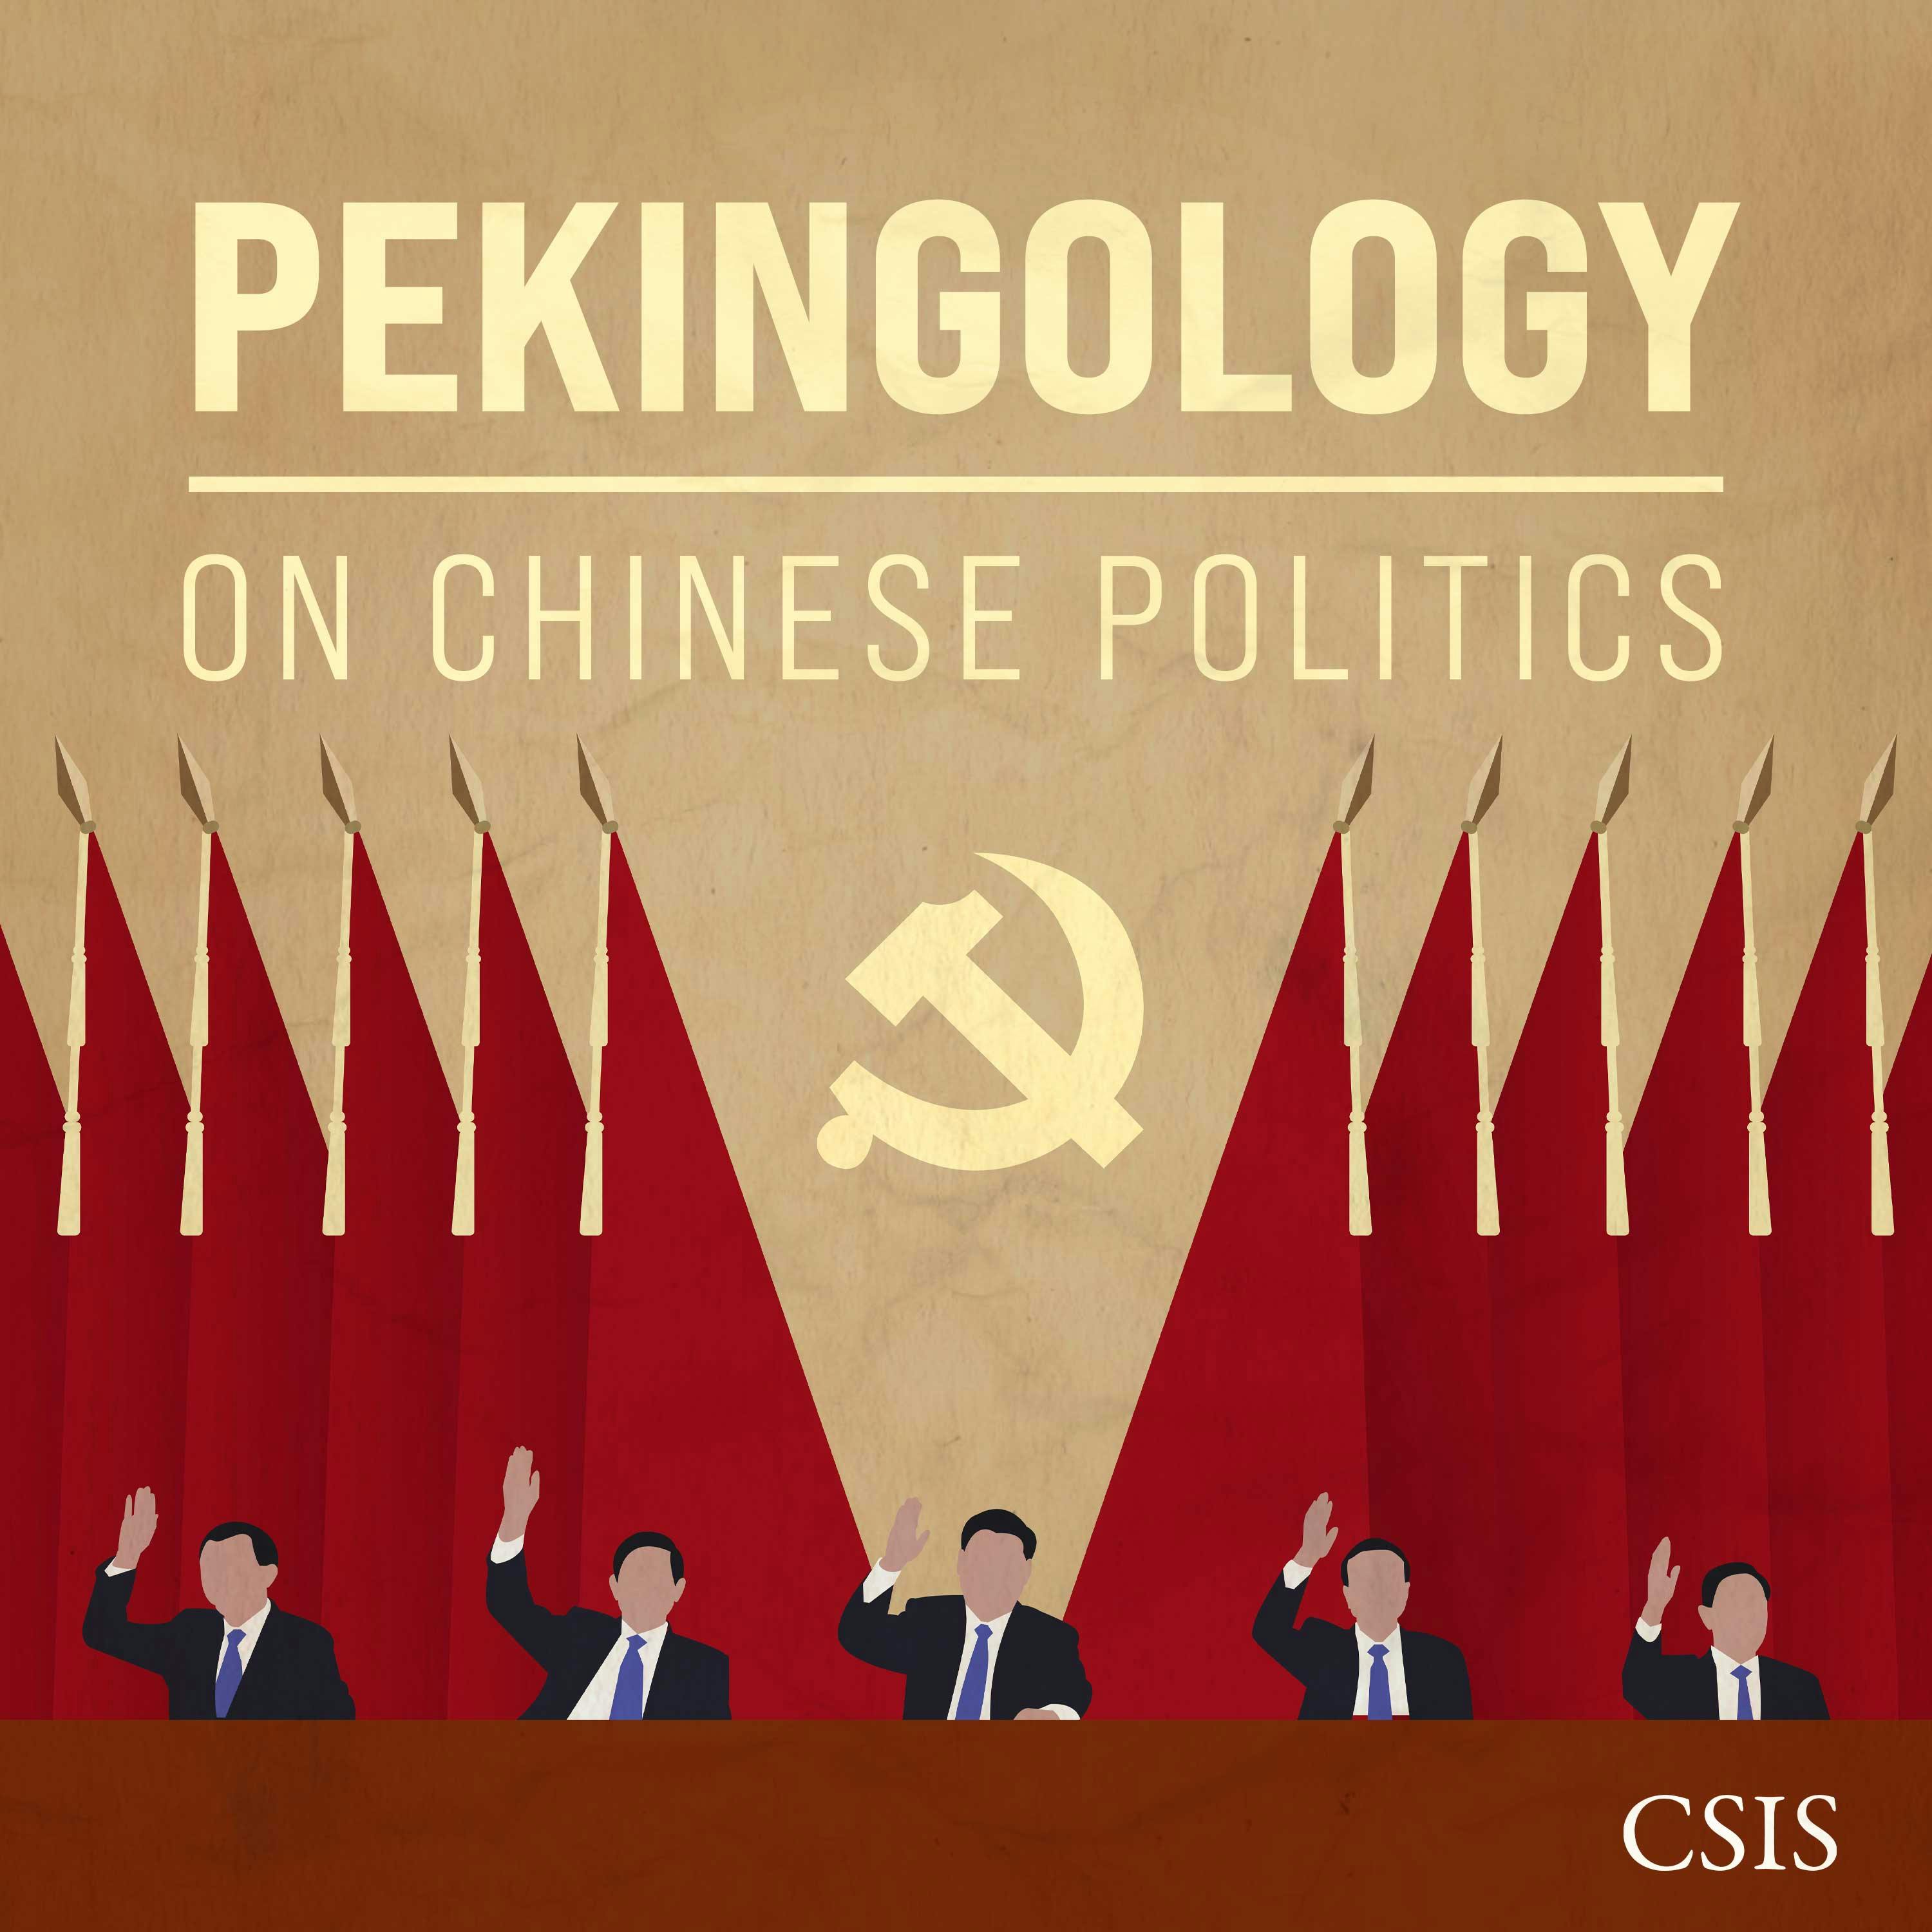 Statistics and State-Building in Mao’s China